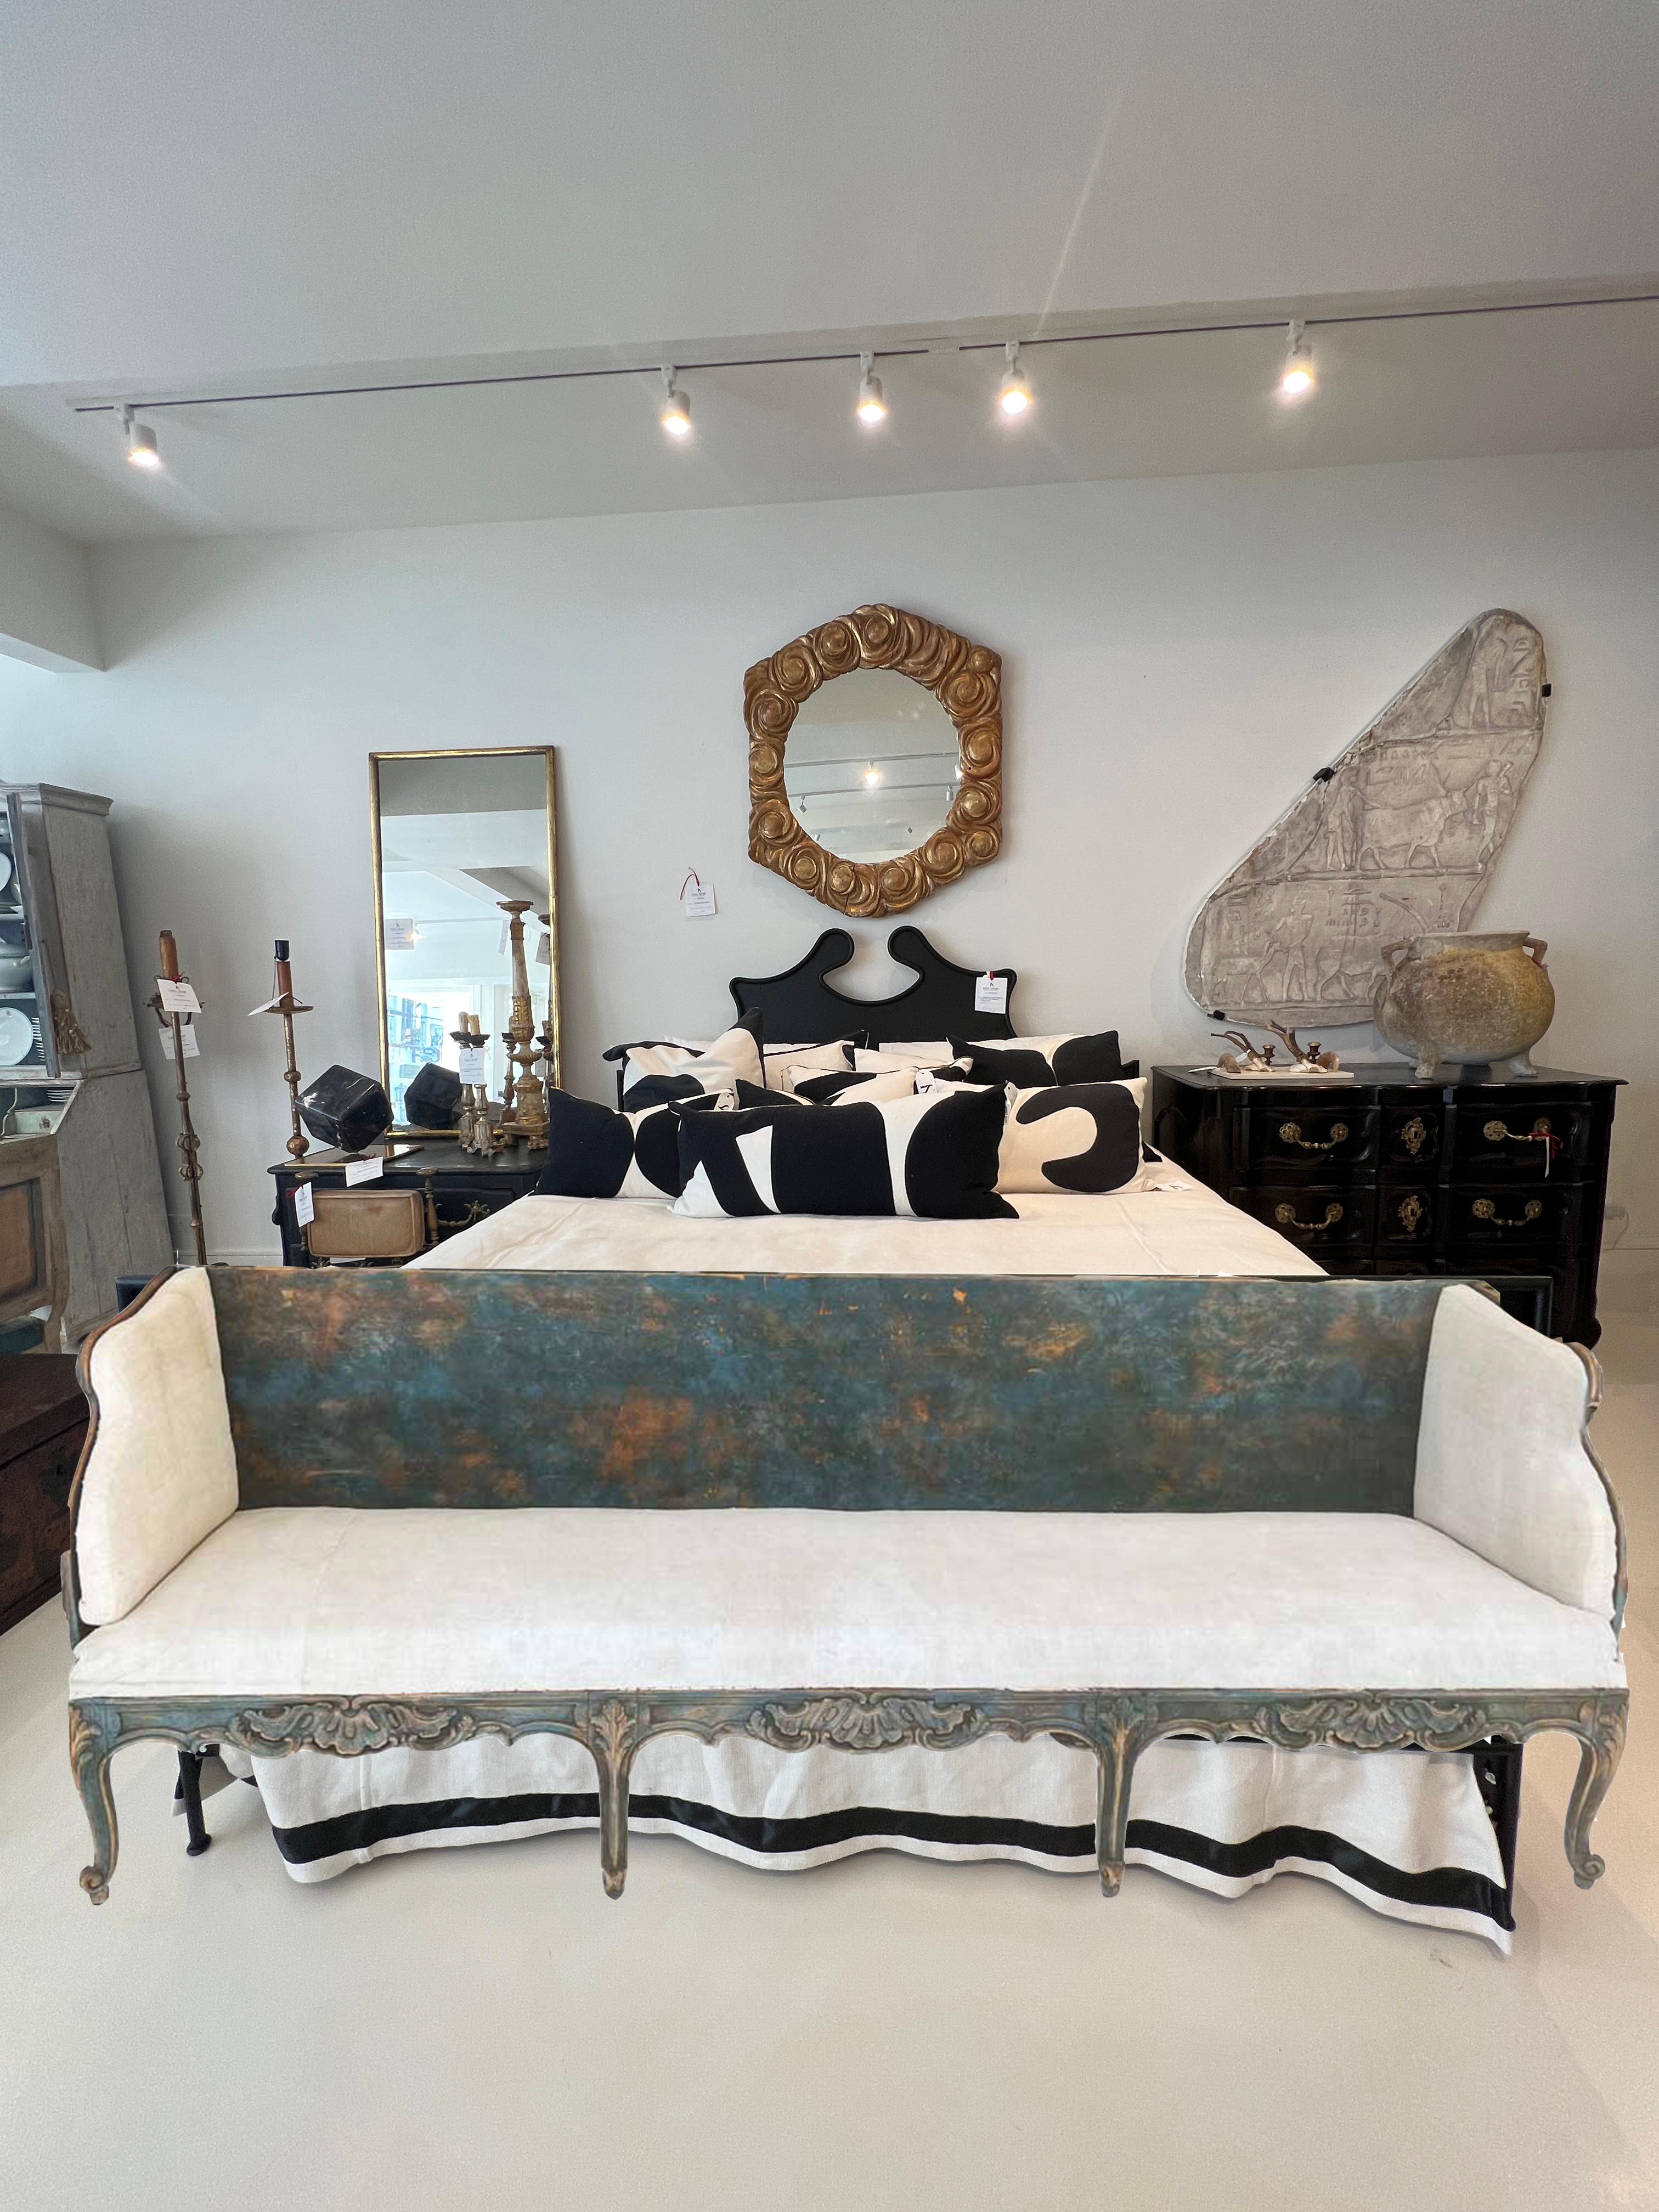 This beautiful Louis XV style iron headboard is part of the custom Tara Shaw Maison collection. Handcrafted in New Orleans. Showroom sample - king size Louis XV iron headboard and footboard with side rails. Minor scratches and scuffs.